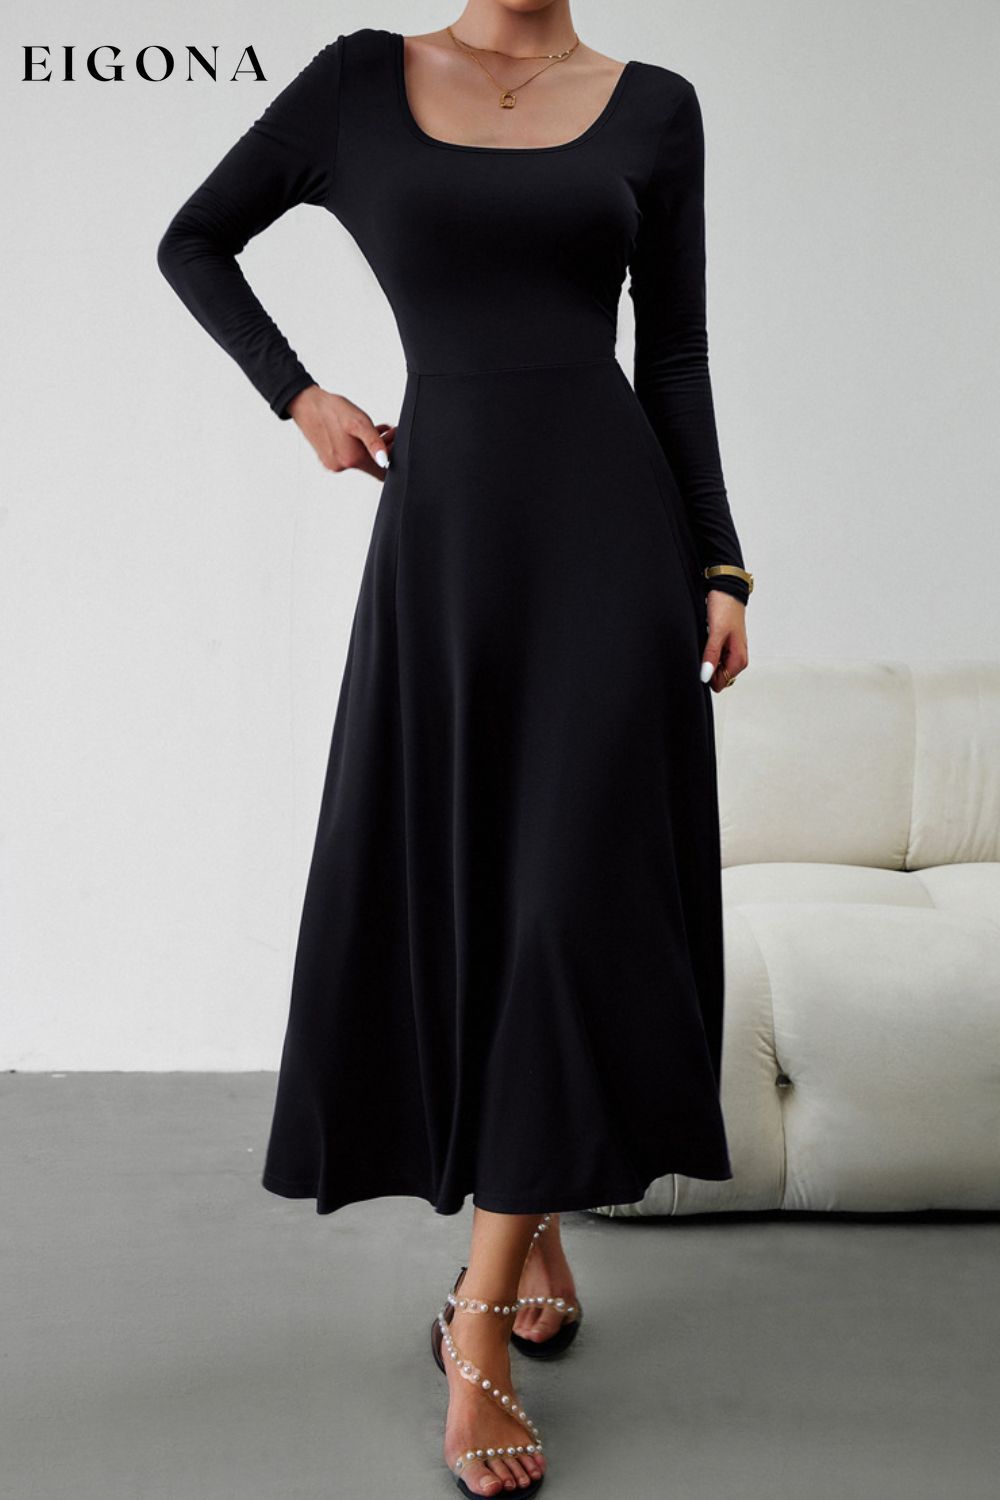 Scoop Neck Long Sleeve Lace-Up Maxi Dress Black clothes dress dresses DY long dress maxi dress Ship From Overseas